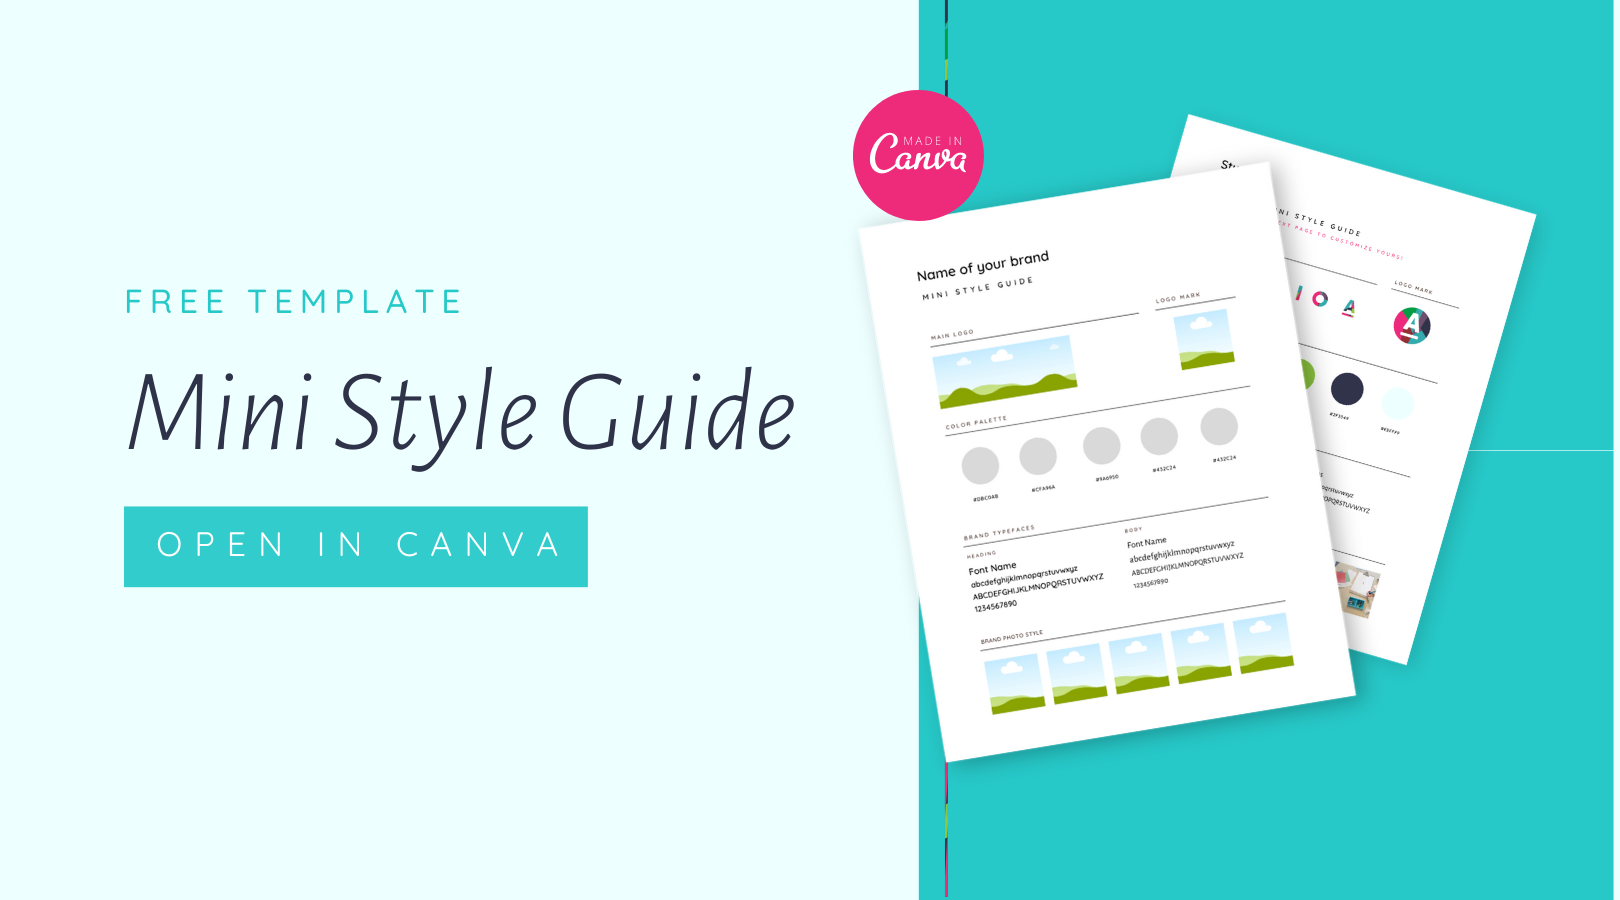 A free template for a mini style guide is open in canva.